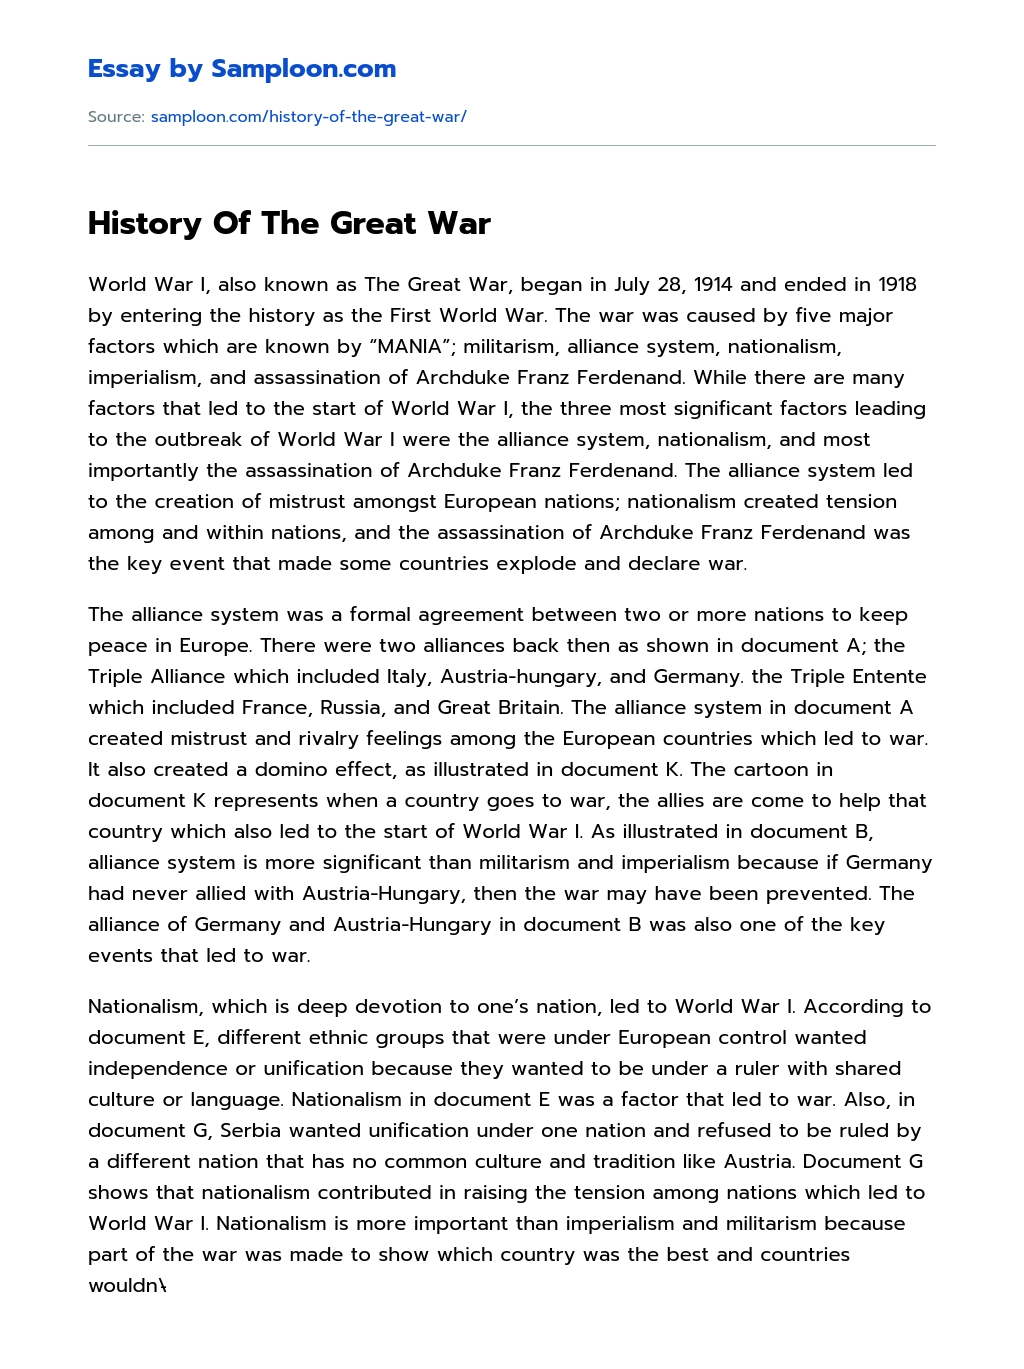 History Of The Great War essay